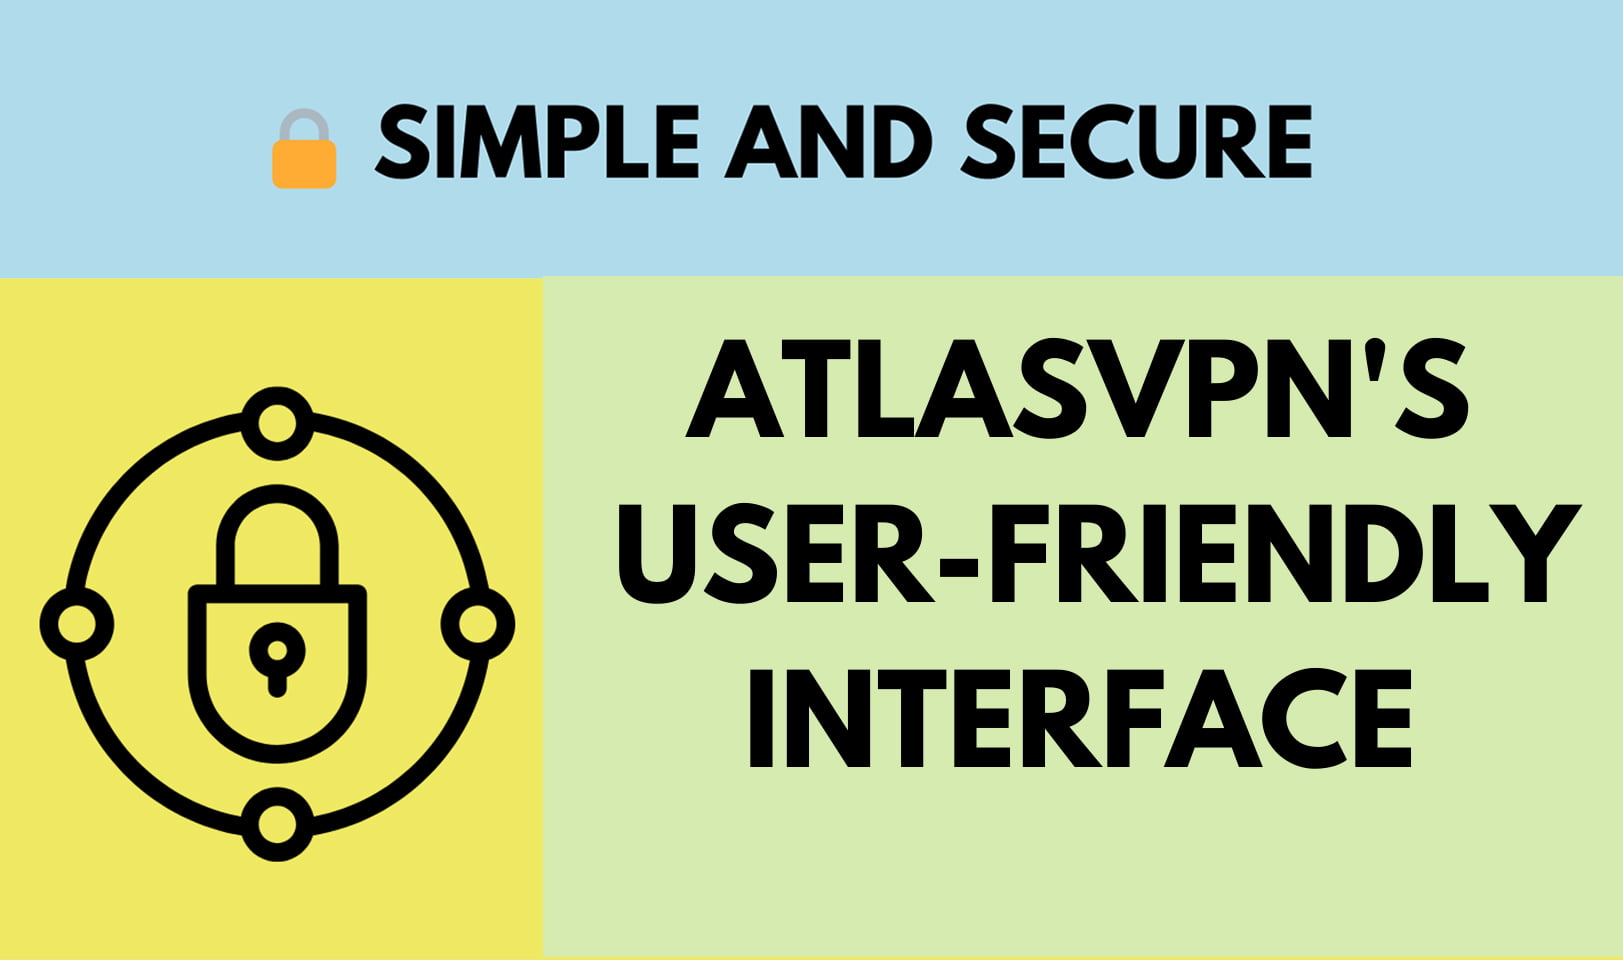 Simple and Secure: AtlasVPN's User-Friendly Interface